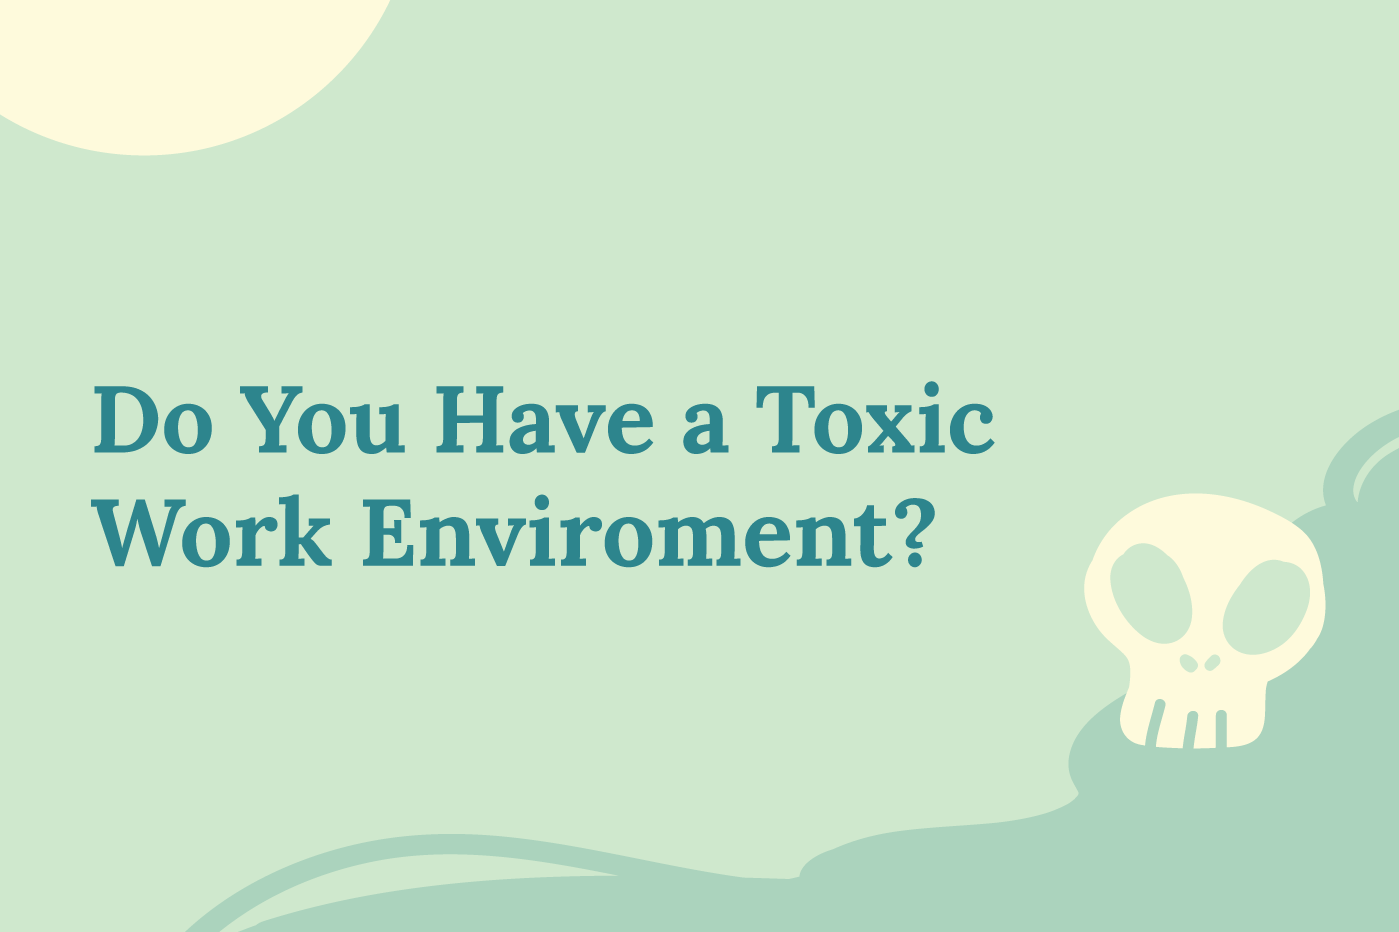 Do You Have a Toxic Work Environment?